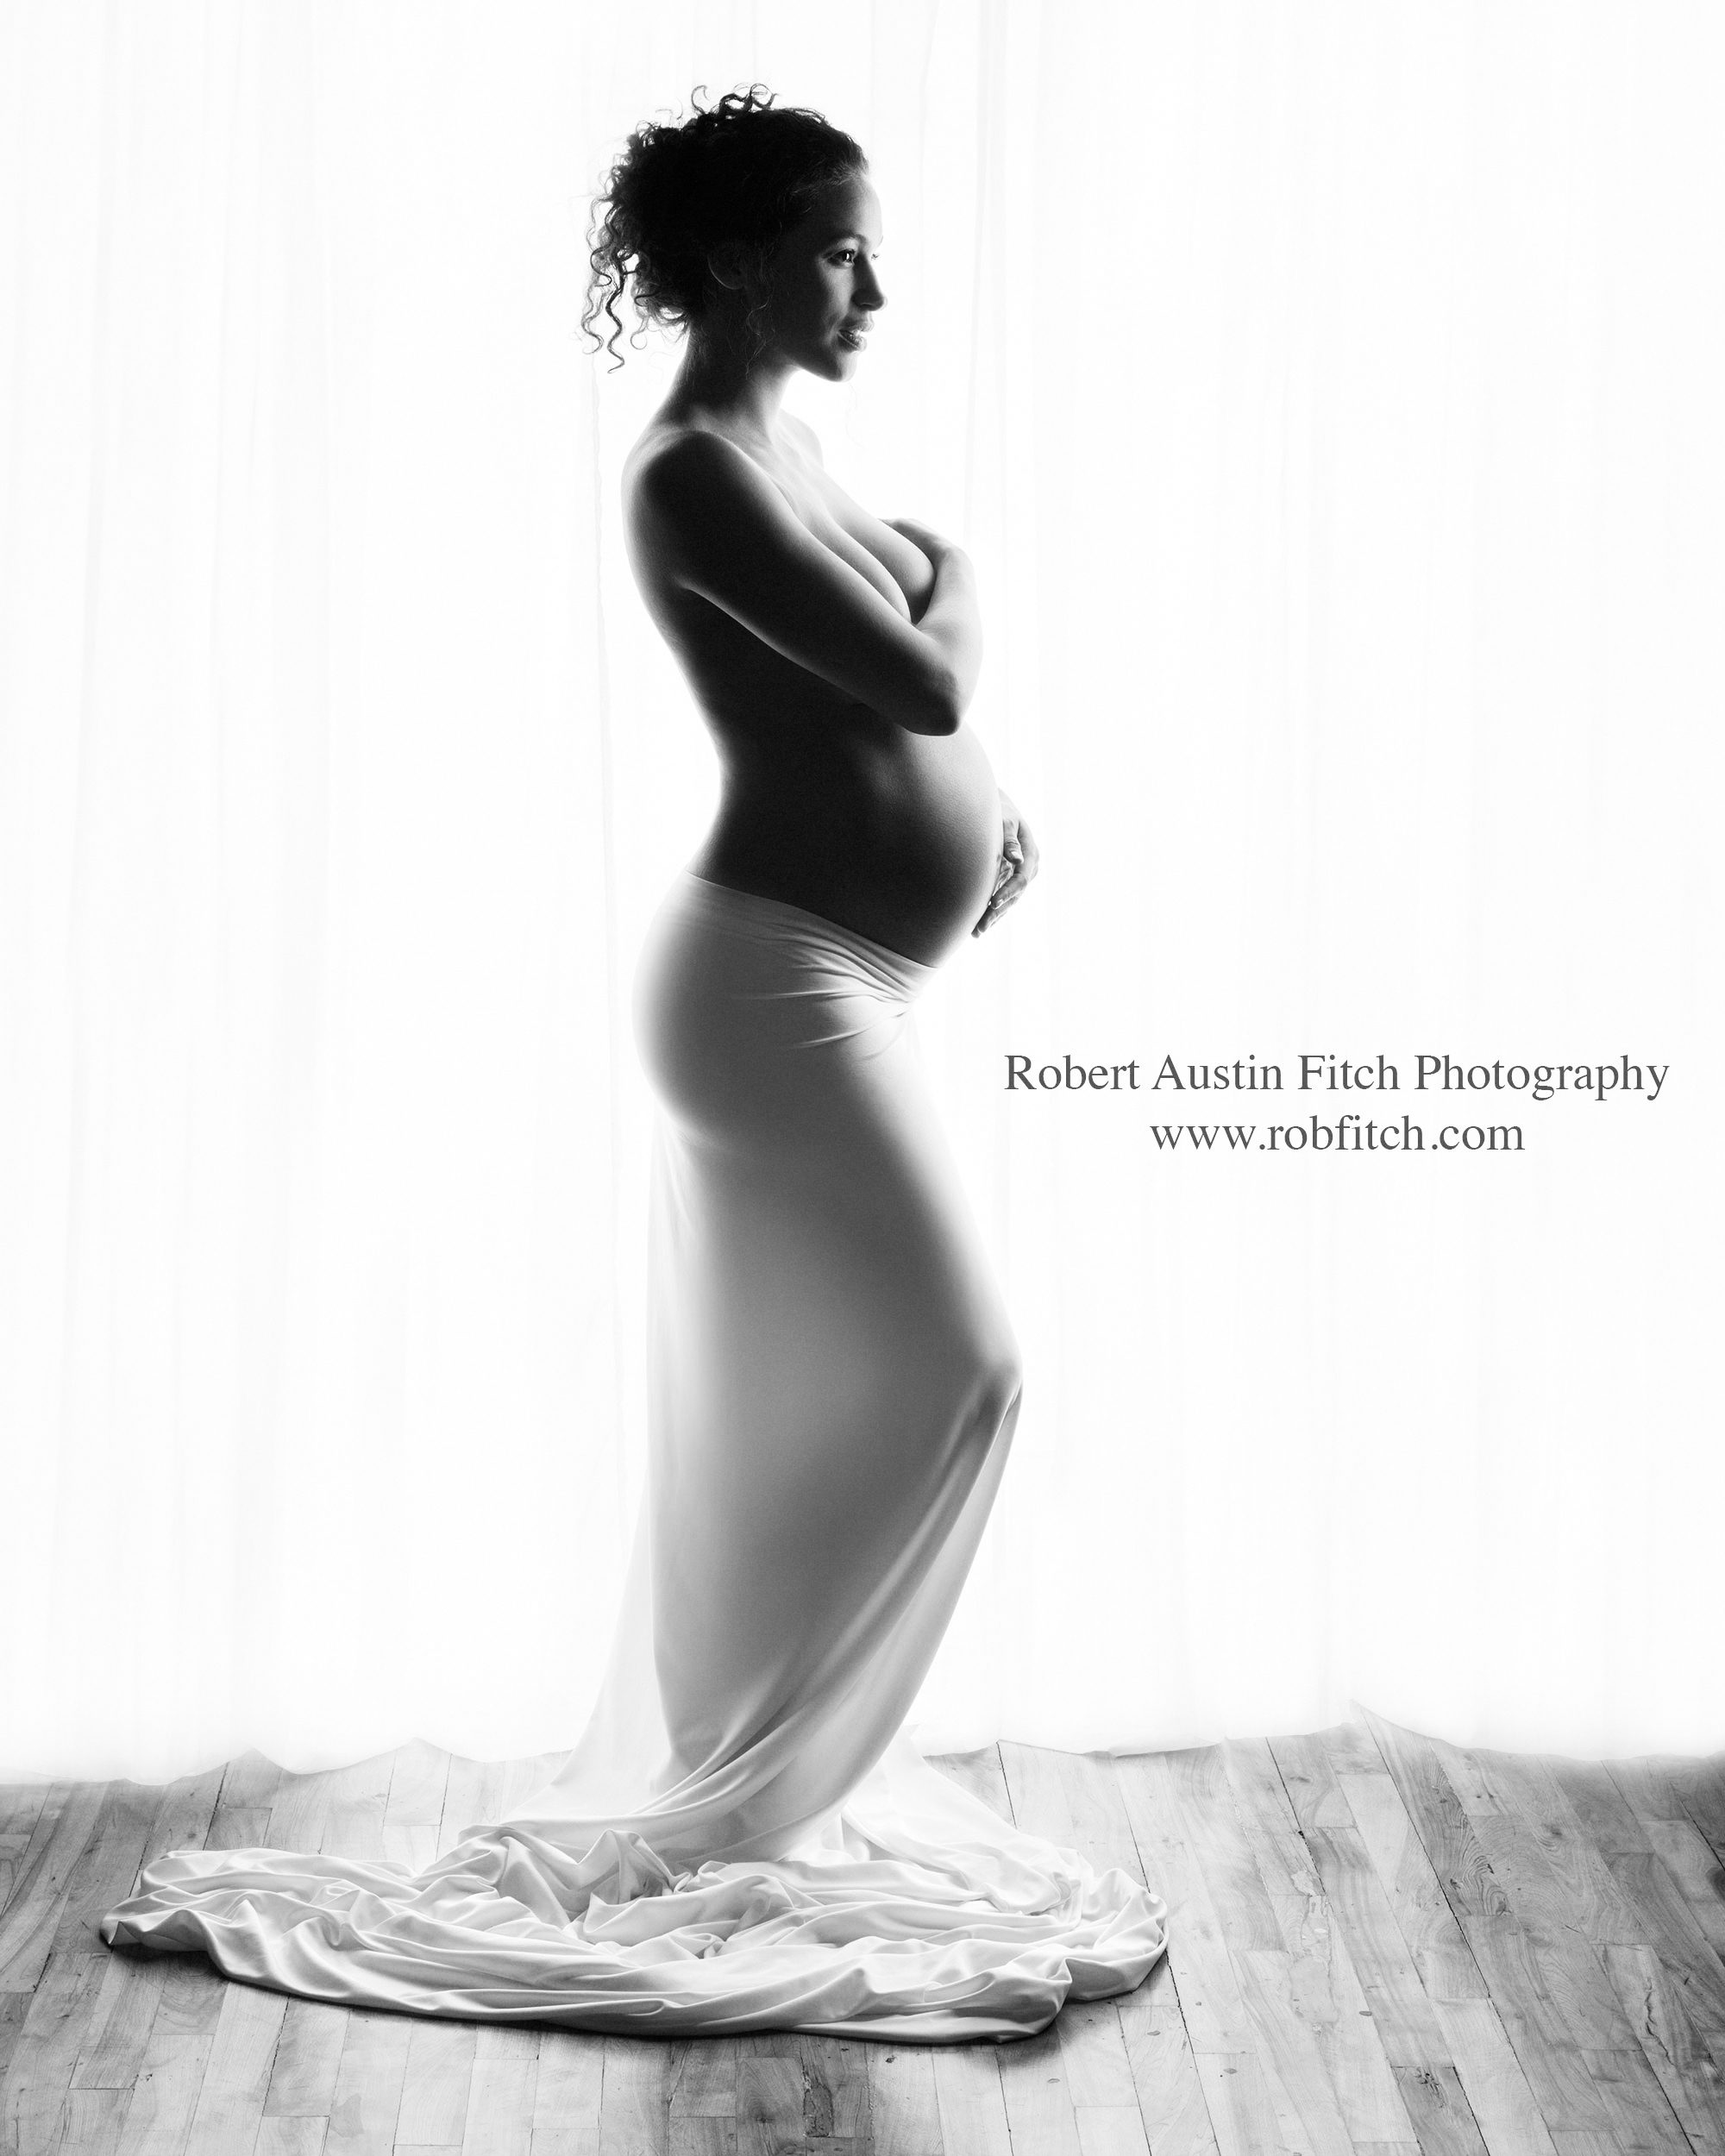 Artistic Black and White Silhouette Maternity Photography NYC NJ CT Robert Austin Fitch